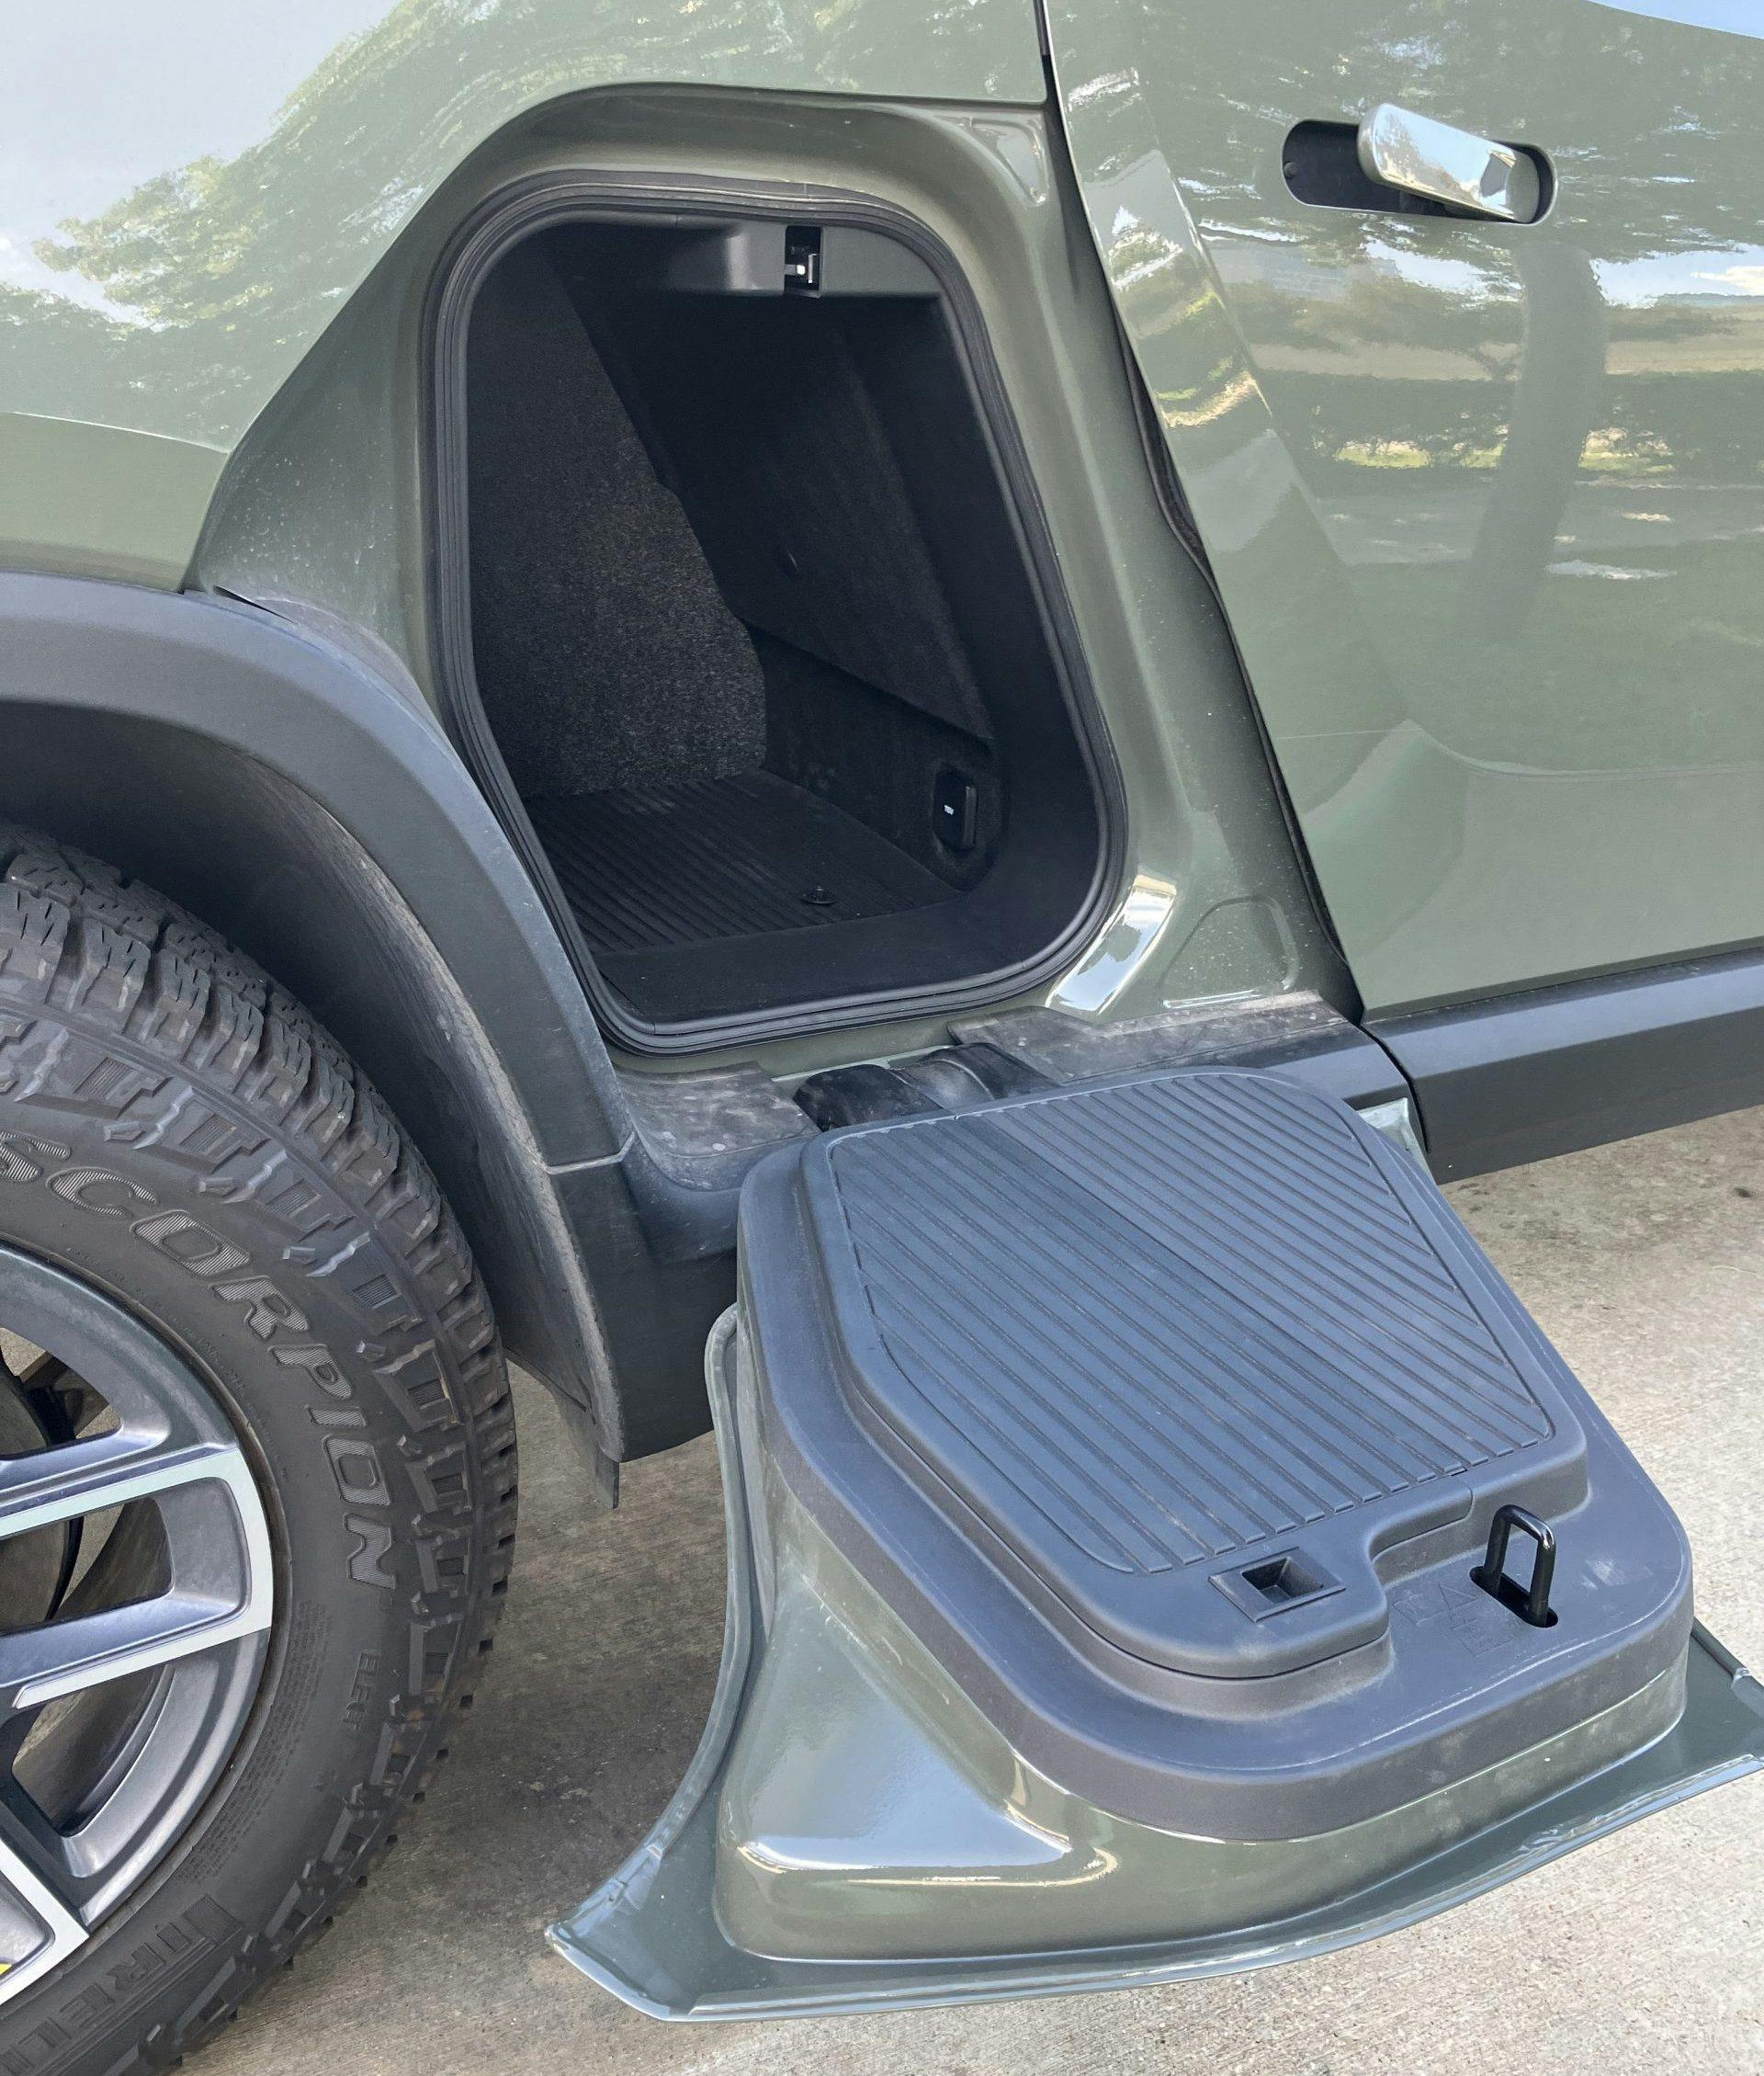 2022 Rivian R1T Launch Edition pass through compartment opening